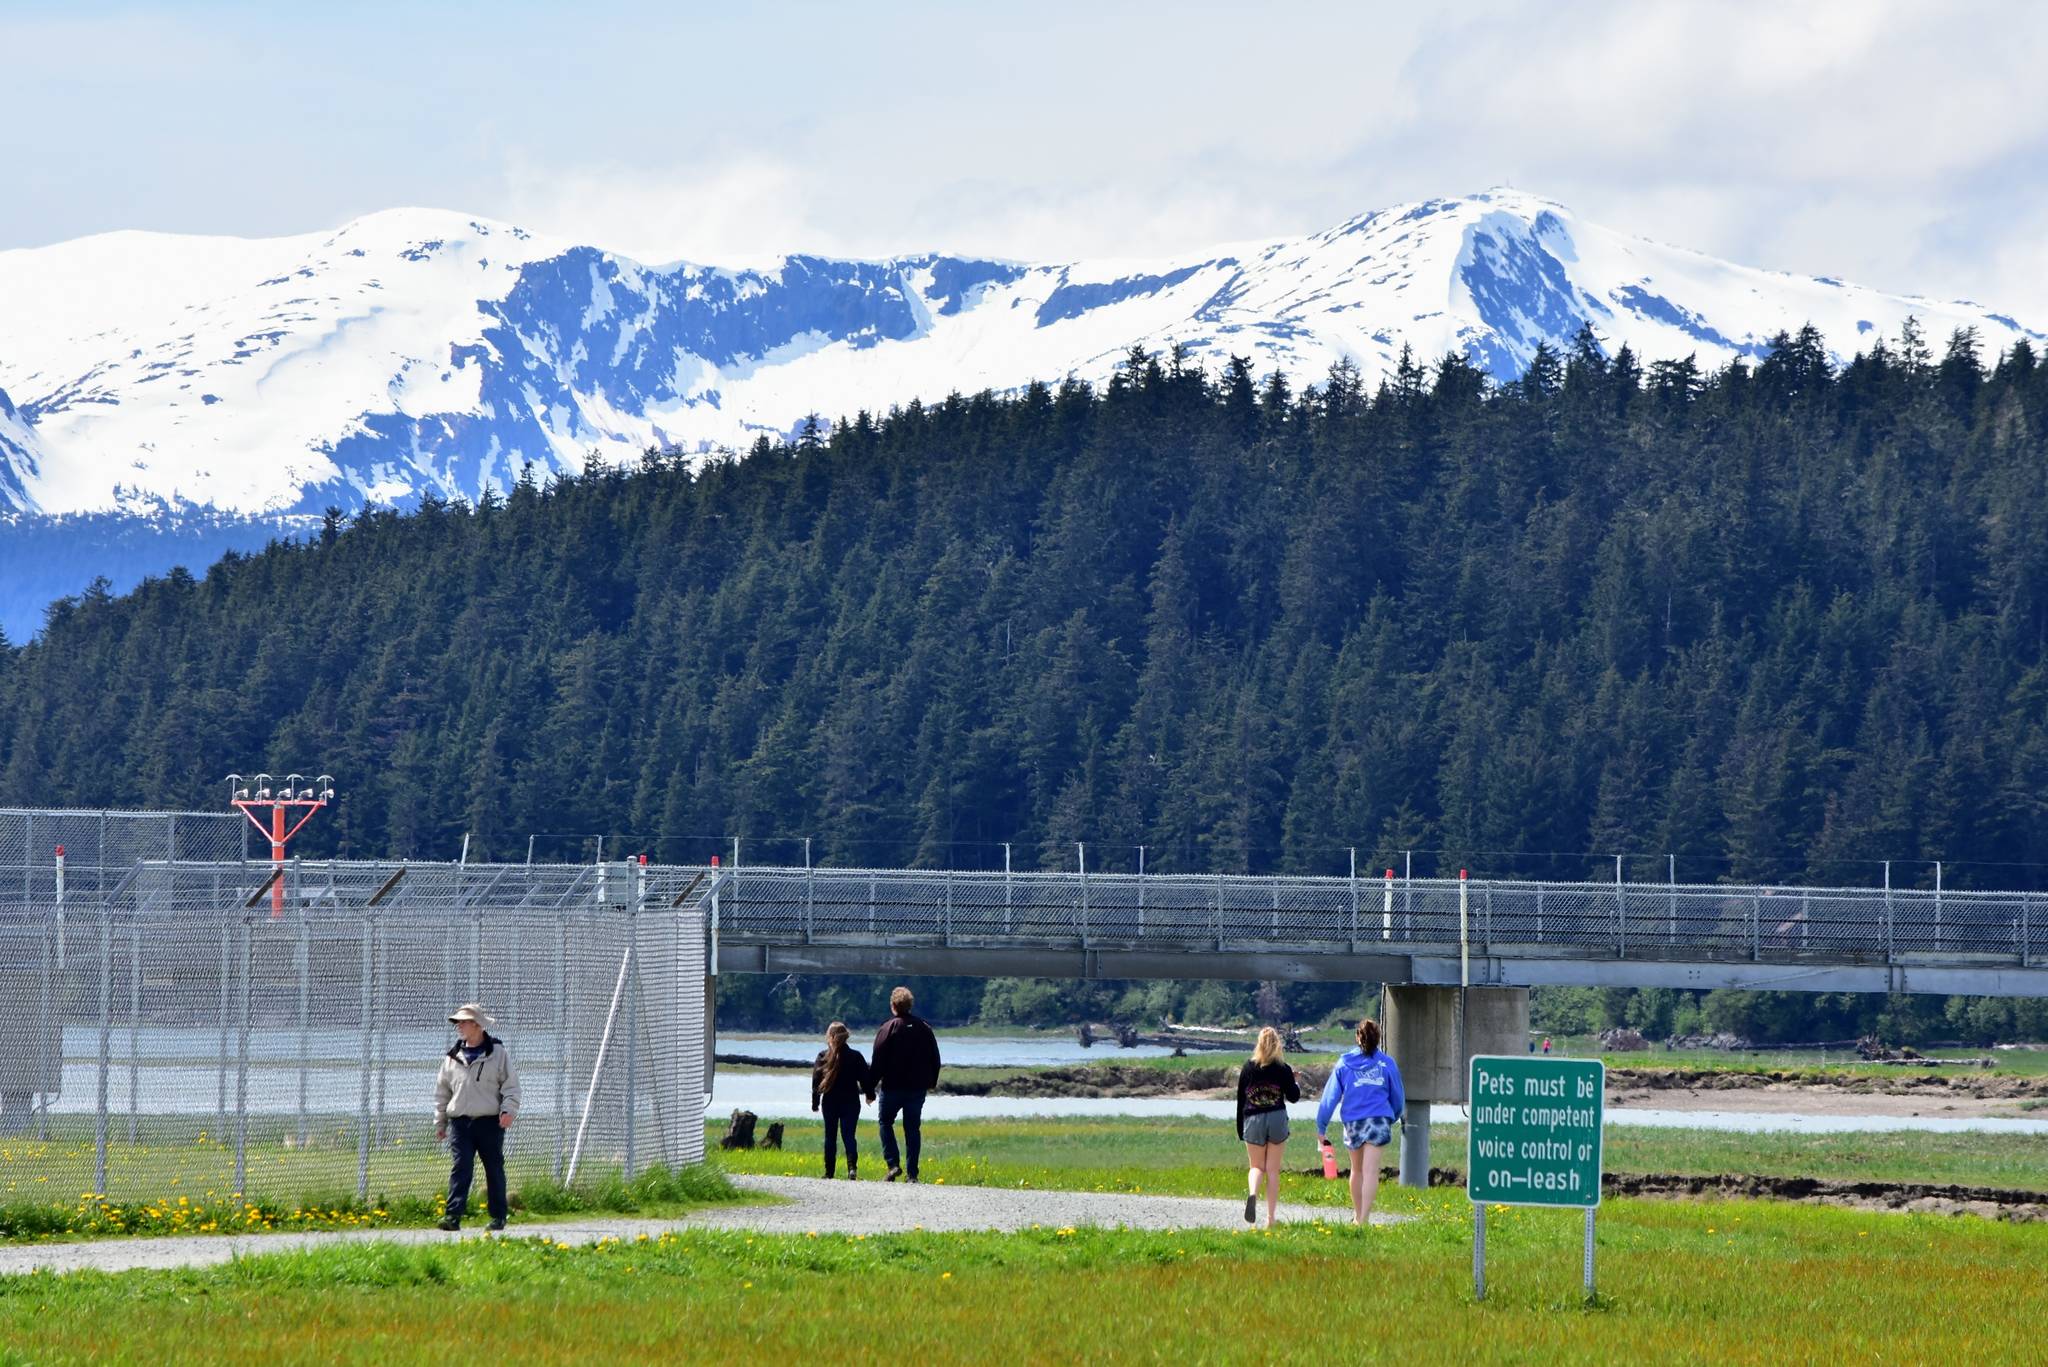 Juneauites walking the Airport Dike Trail, seen here on Tuesday, May 25, 2021, probably won’t see the monitoring wells being installed in the area around the Juneau International Airport to test for contamination from per- and polyfluoroalkyl substances, commonly known as PFAS chemicals. Ground water testing is set to take place over the next few years. (Peter Segall / Juneau Empire)